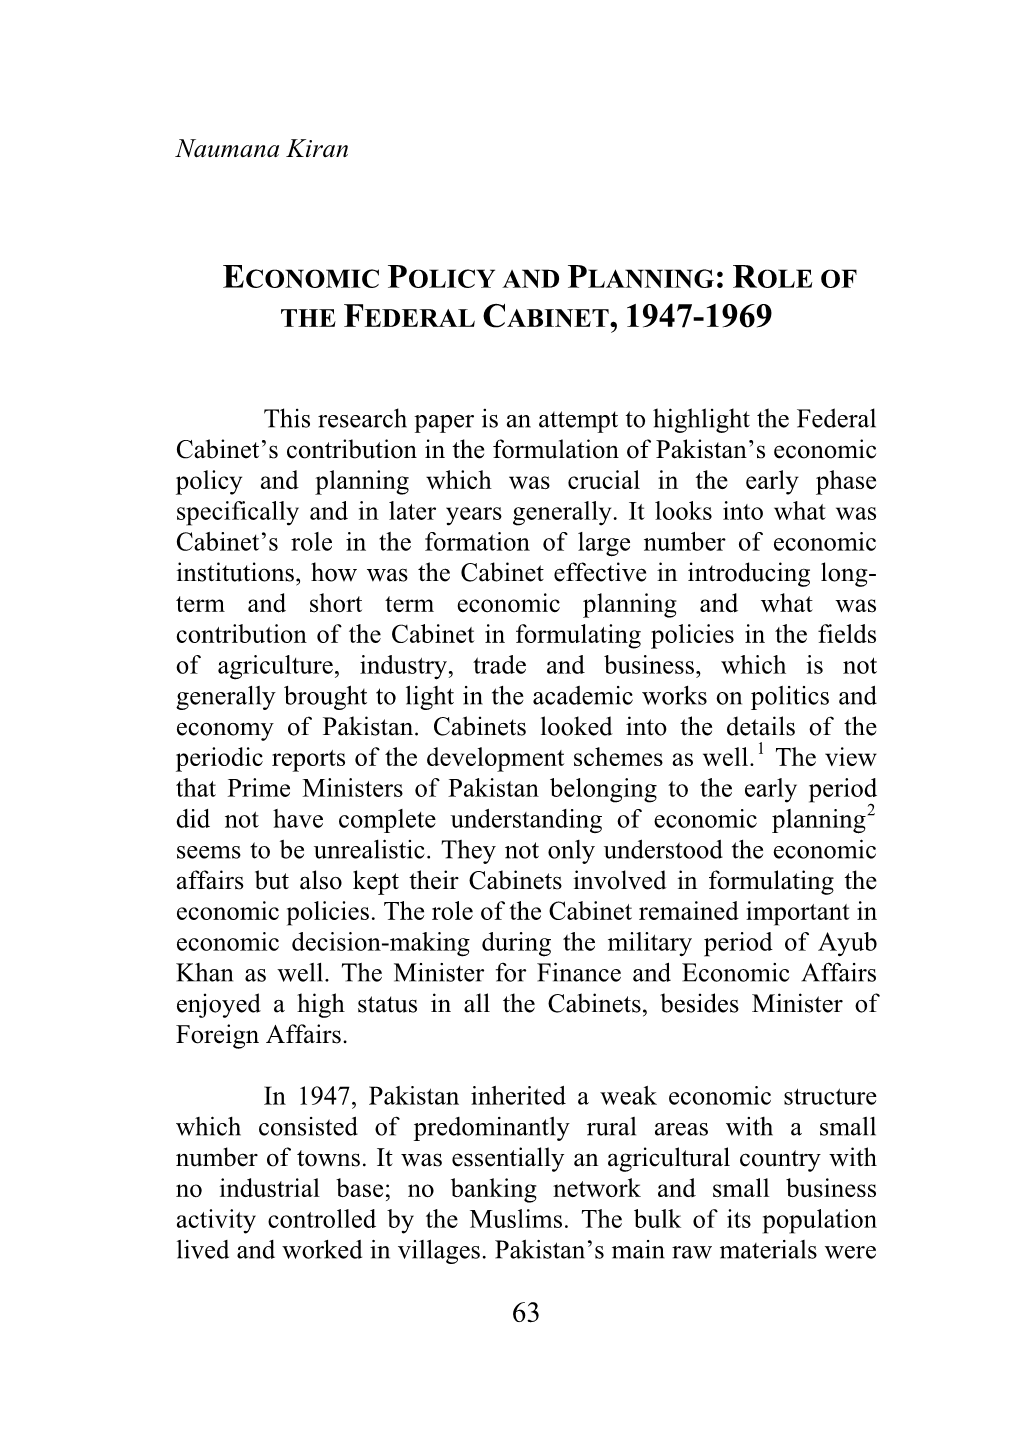 Economic Policy and Planning: Role of the Federal Cabinet, 1947-1969